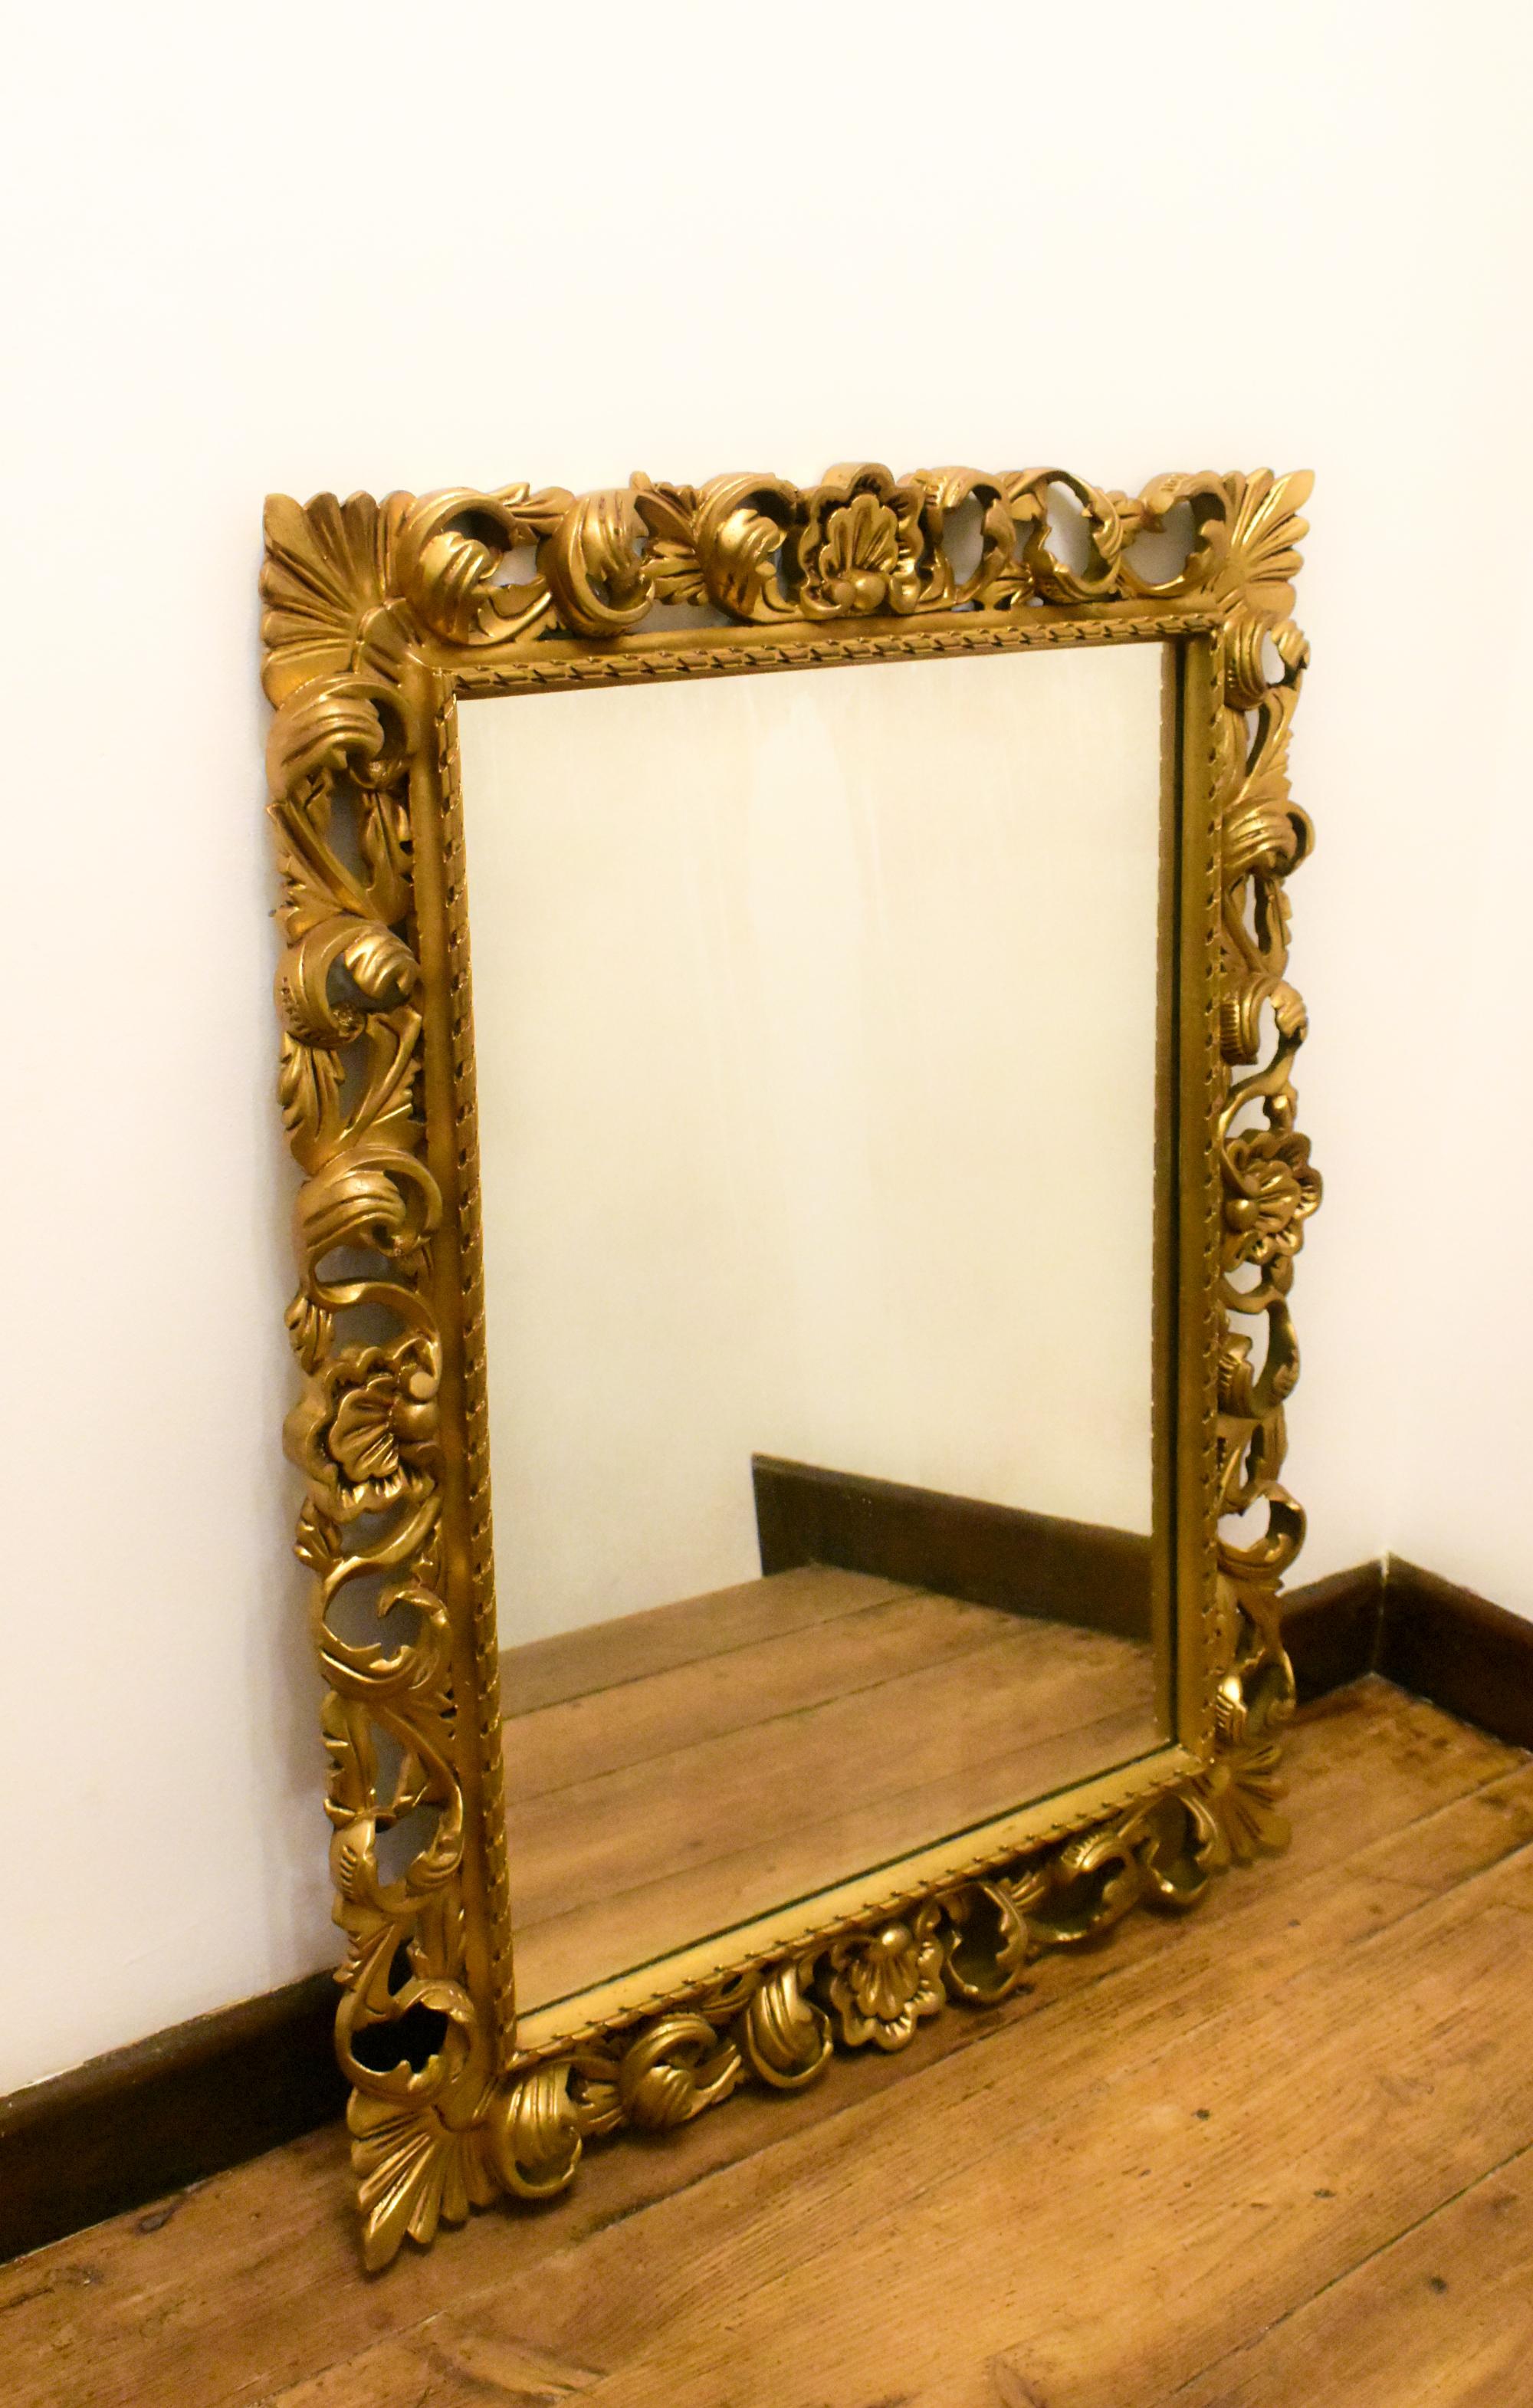 Large Florentine Style Giltwood Wall Mirror 

This beautifully carved gilt mirror features large floral leaves and shells surrounding a moulded rope inner frame. 

To the rear are hanging hooks for landscape or portrait hanging modes. 

The ornate